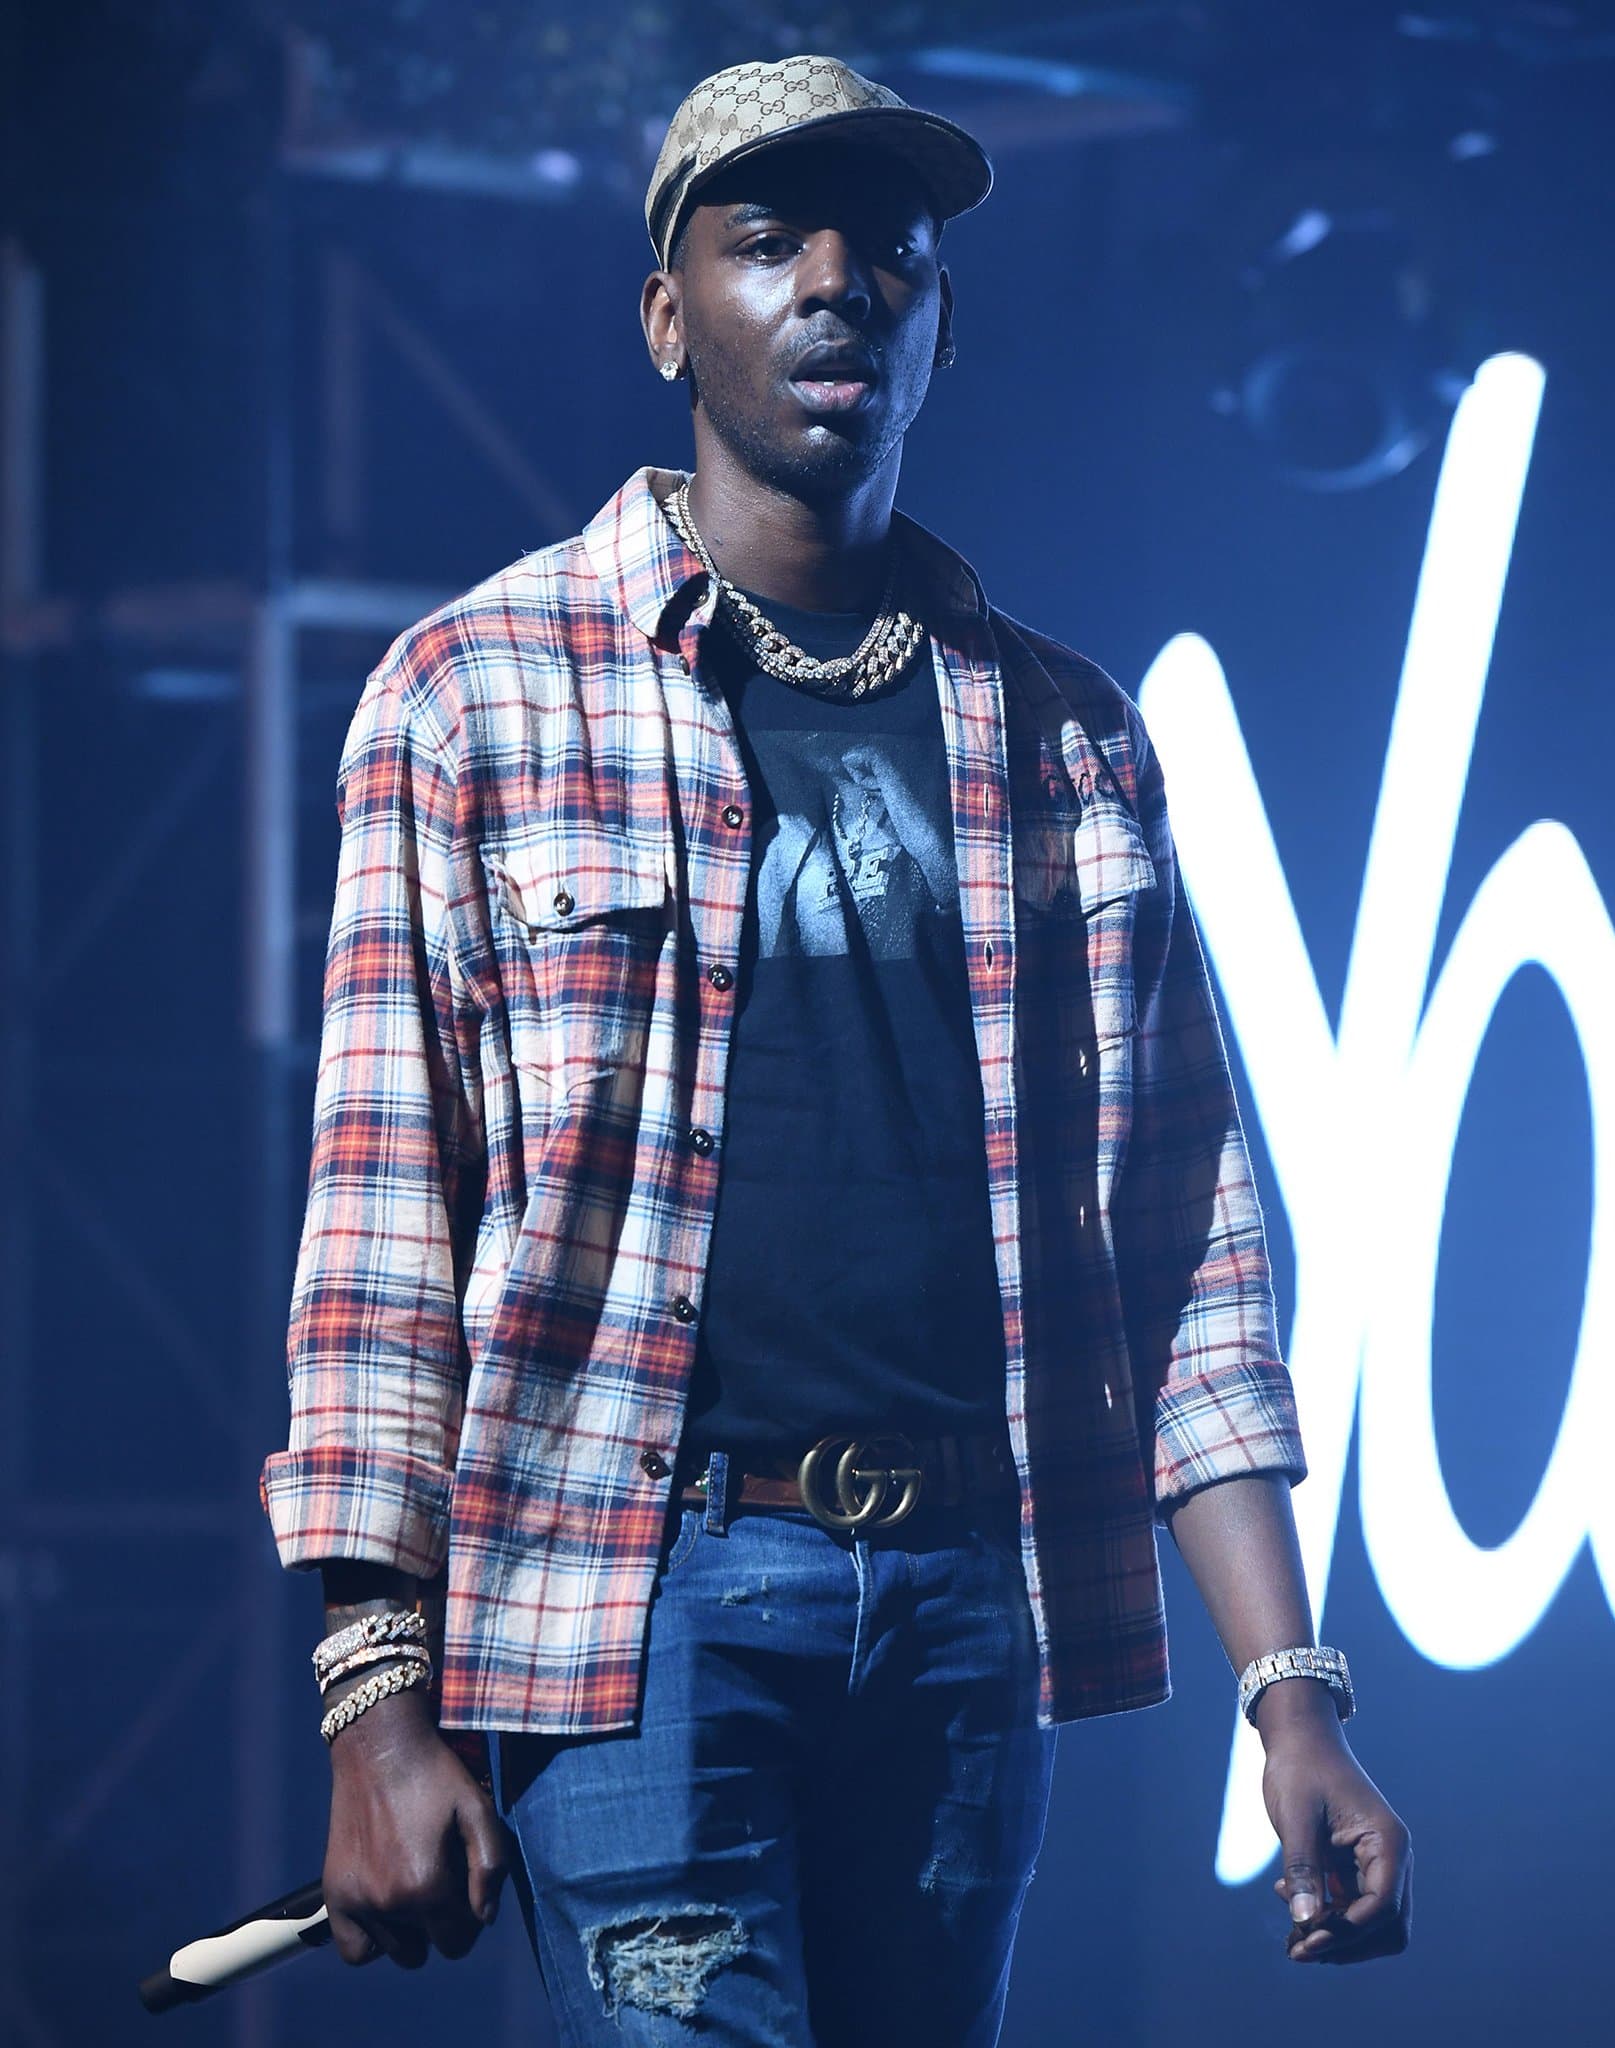 Rapper Young Dolph was shot and killed outside a bakery in Memphis